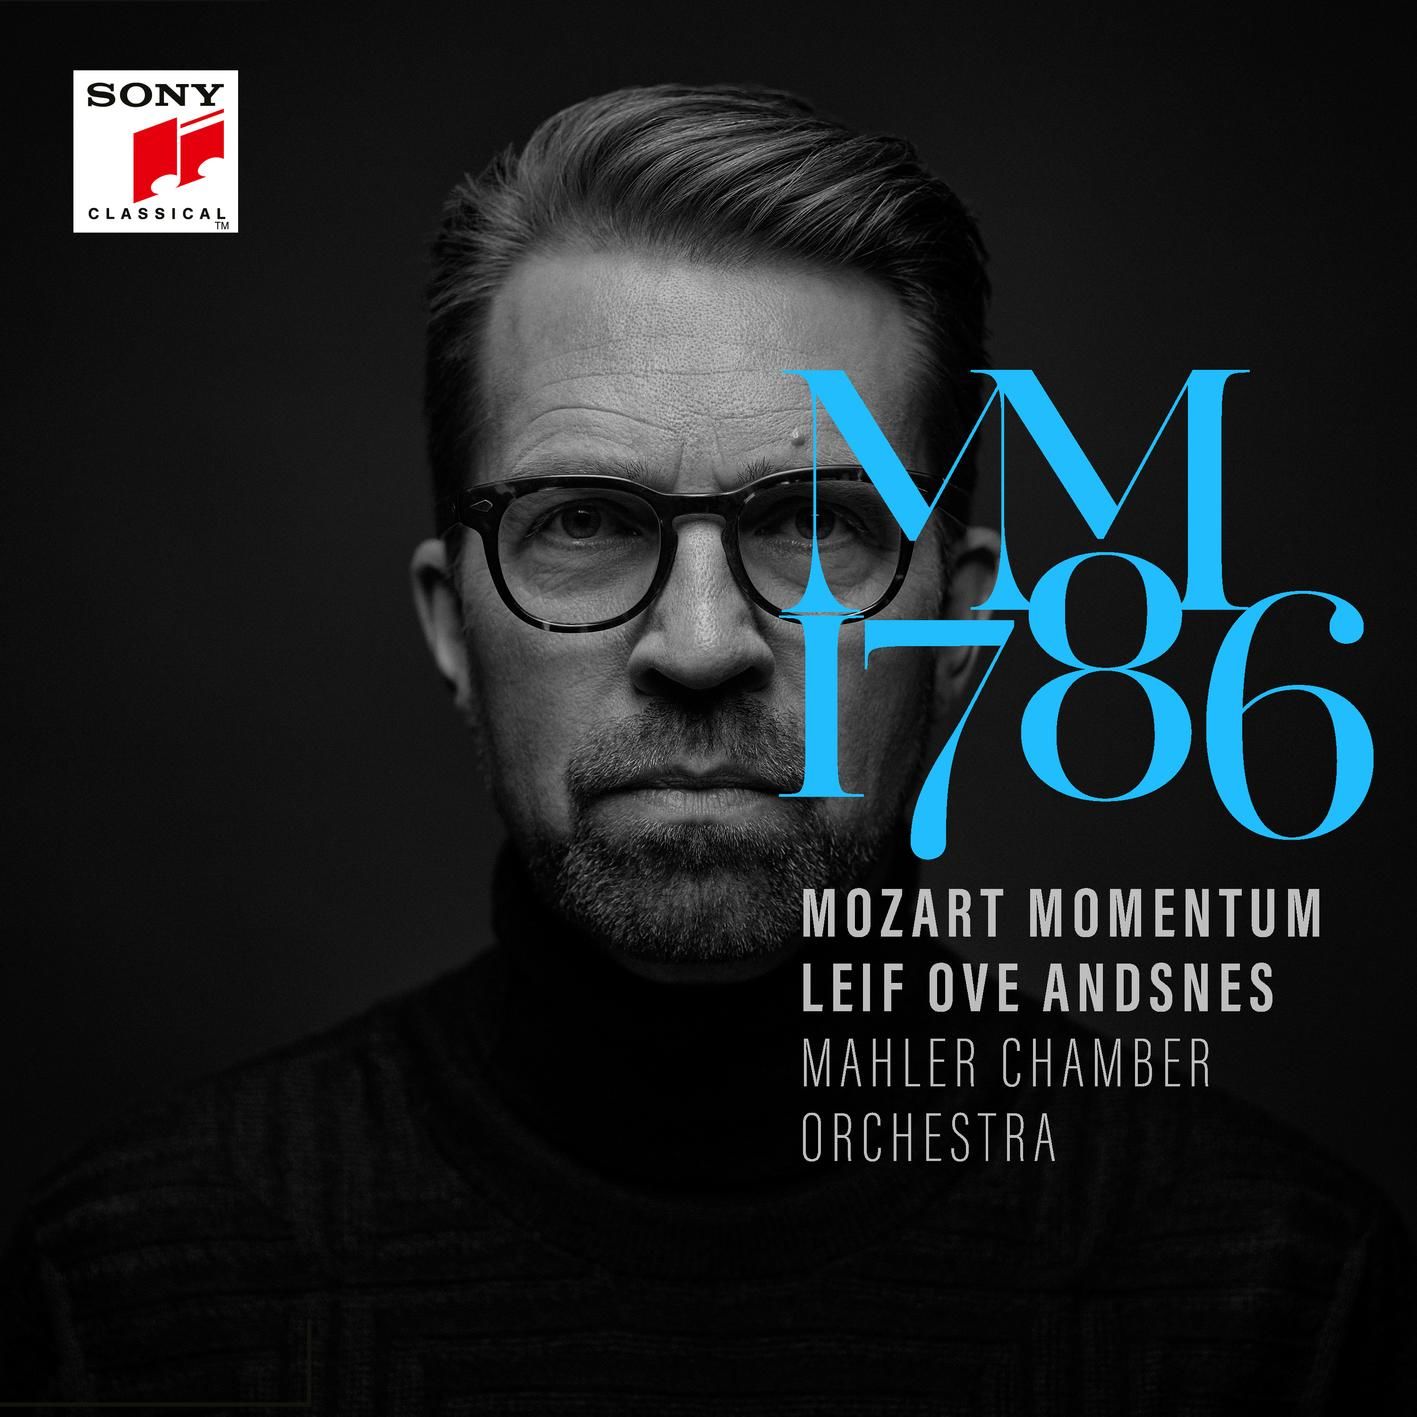 1786 Mozart Momentum - Leif Ove Andsnes - Sony Classical CD 2 of 2 - 24-96